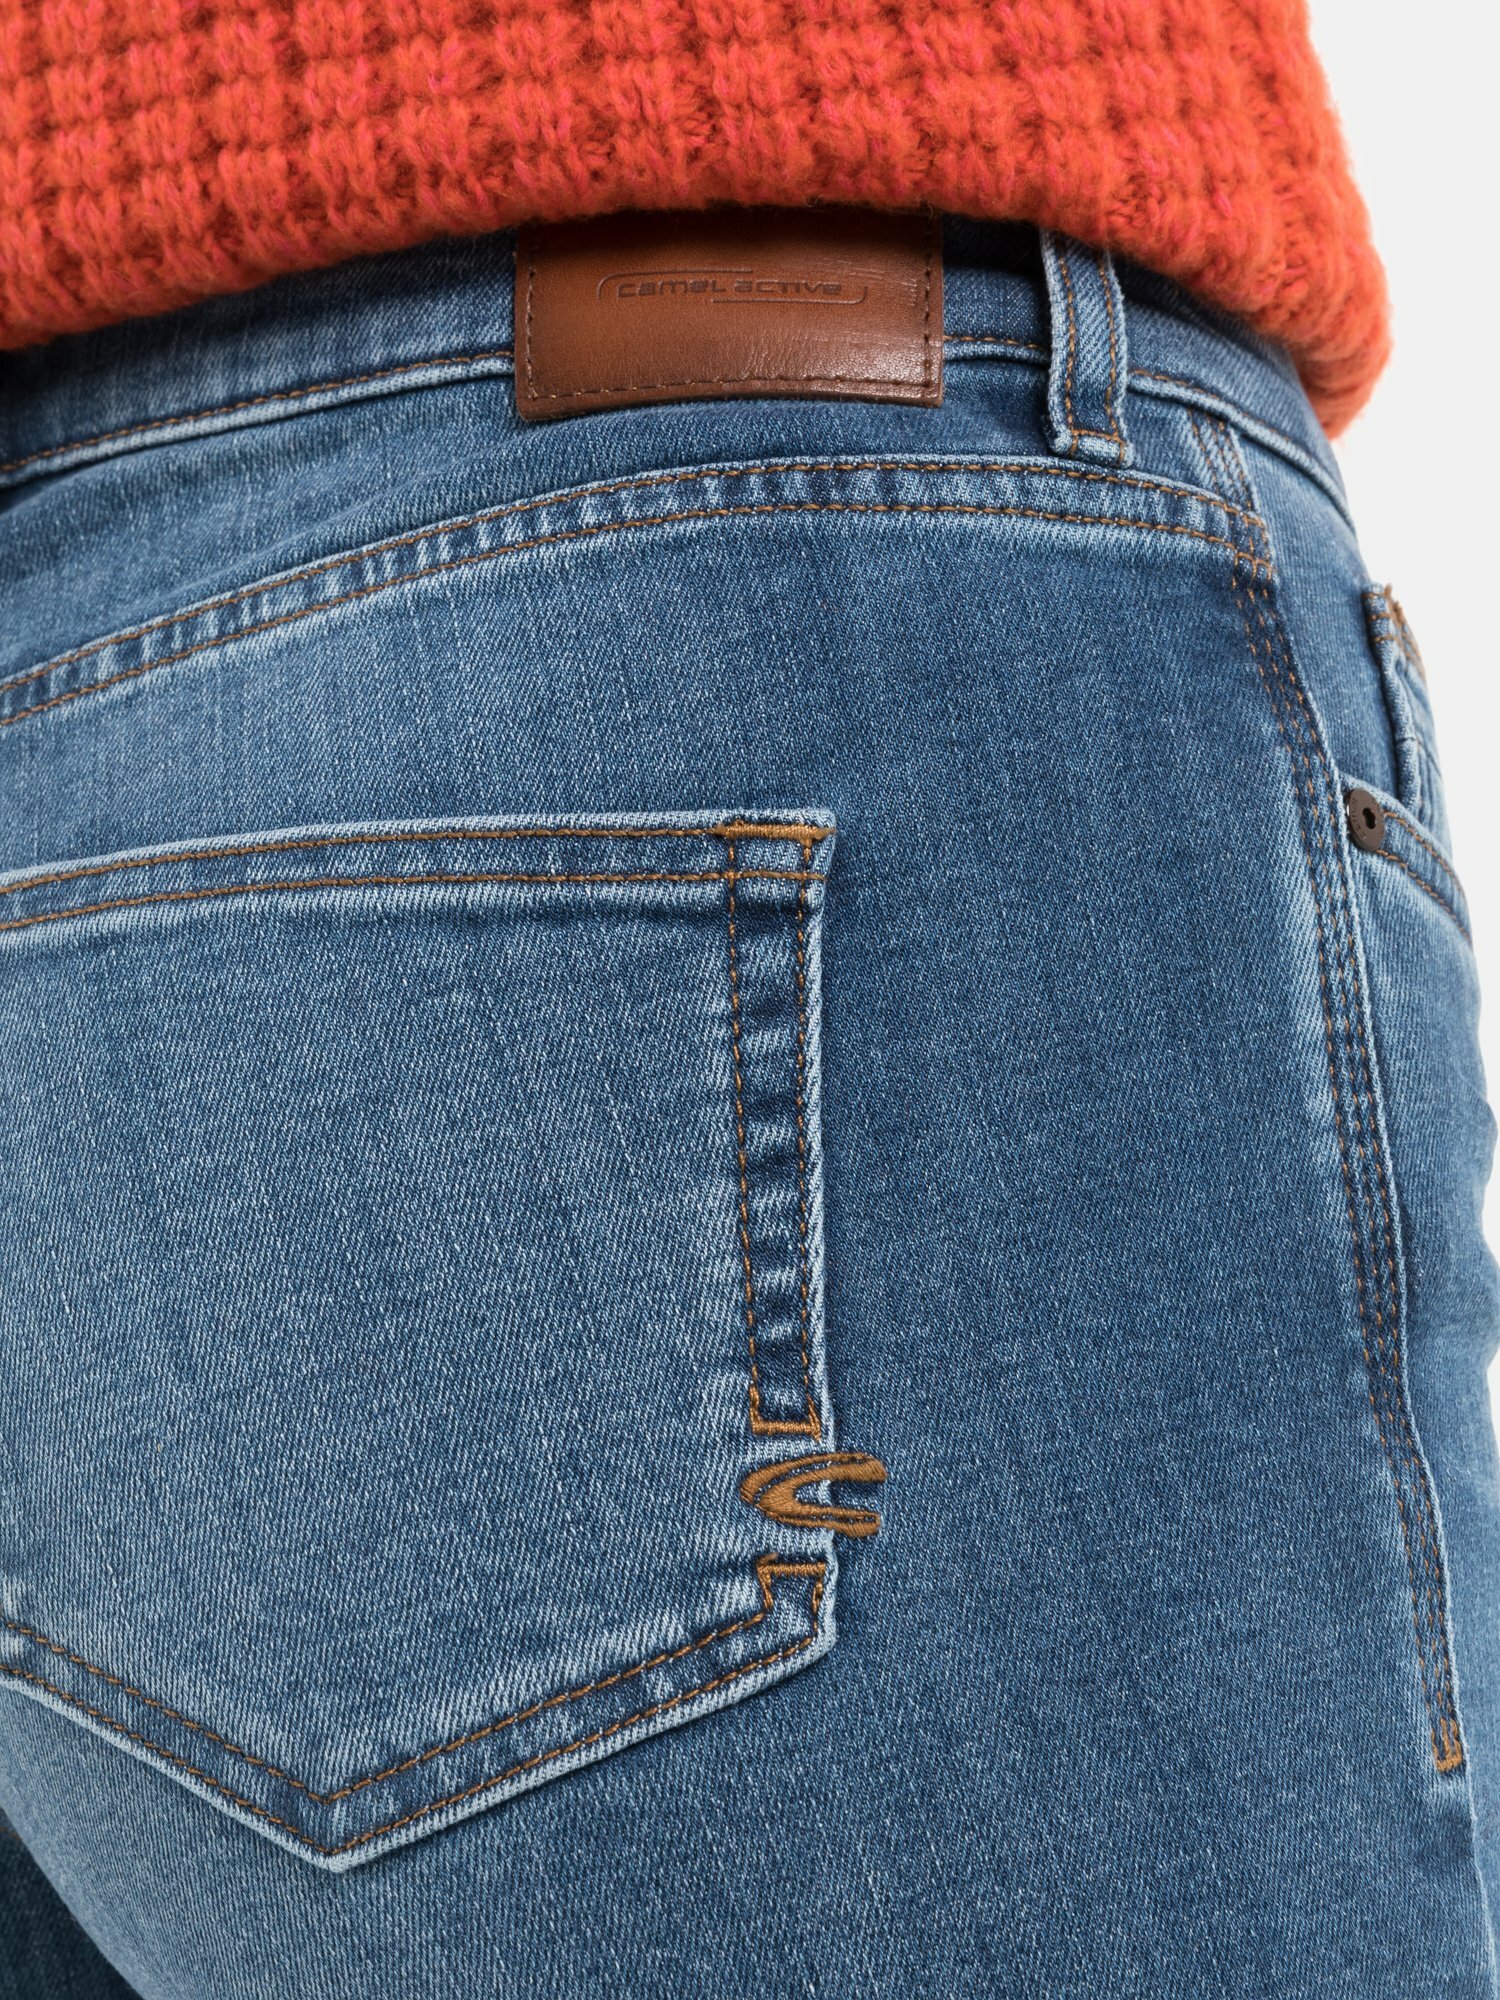 CAMEL ACTIVE Jeans in Blau 